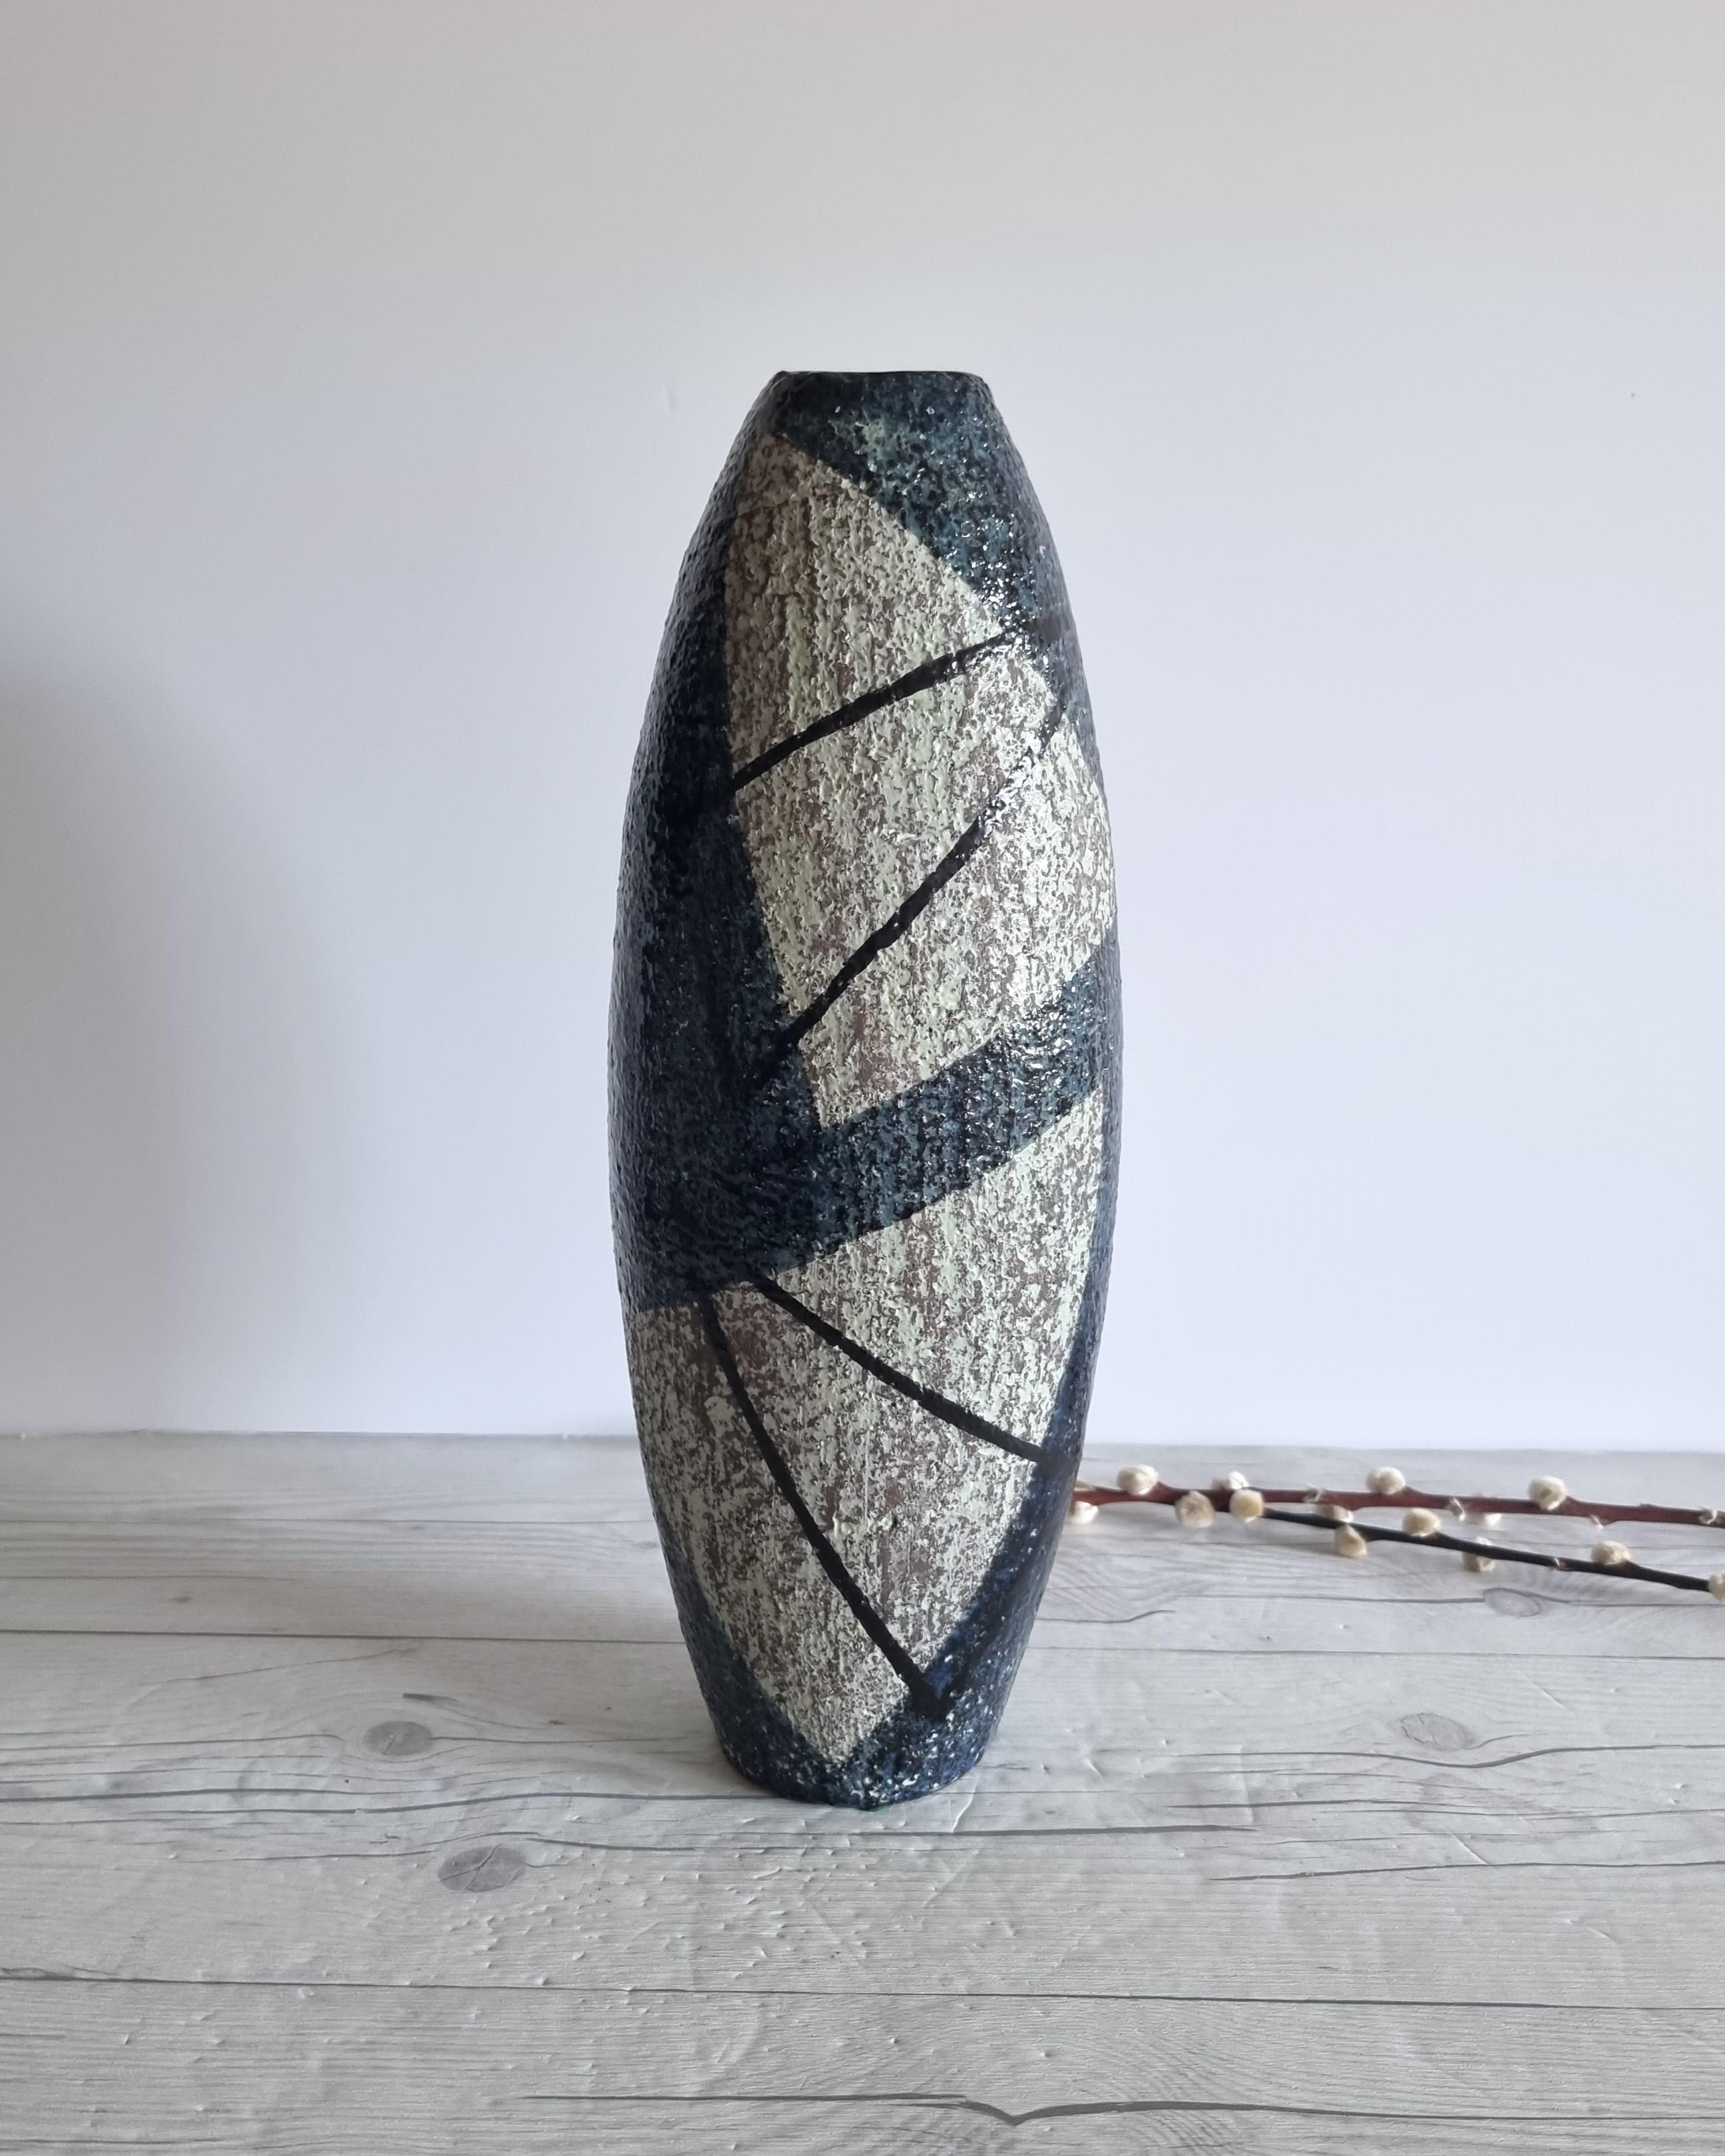 This statement work of Mid-Century Modern design is by Ingrid Atterberg, (b. 1920 - d. 2008) a celebrated epitome for illustrious 20th century Swedish ceramic design. Atterberg was also a leading designer for Upsala Ekeby for whom she designed this